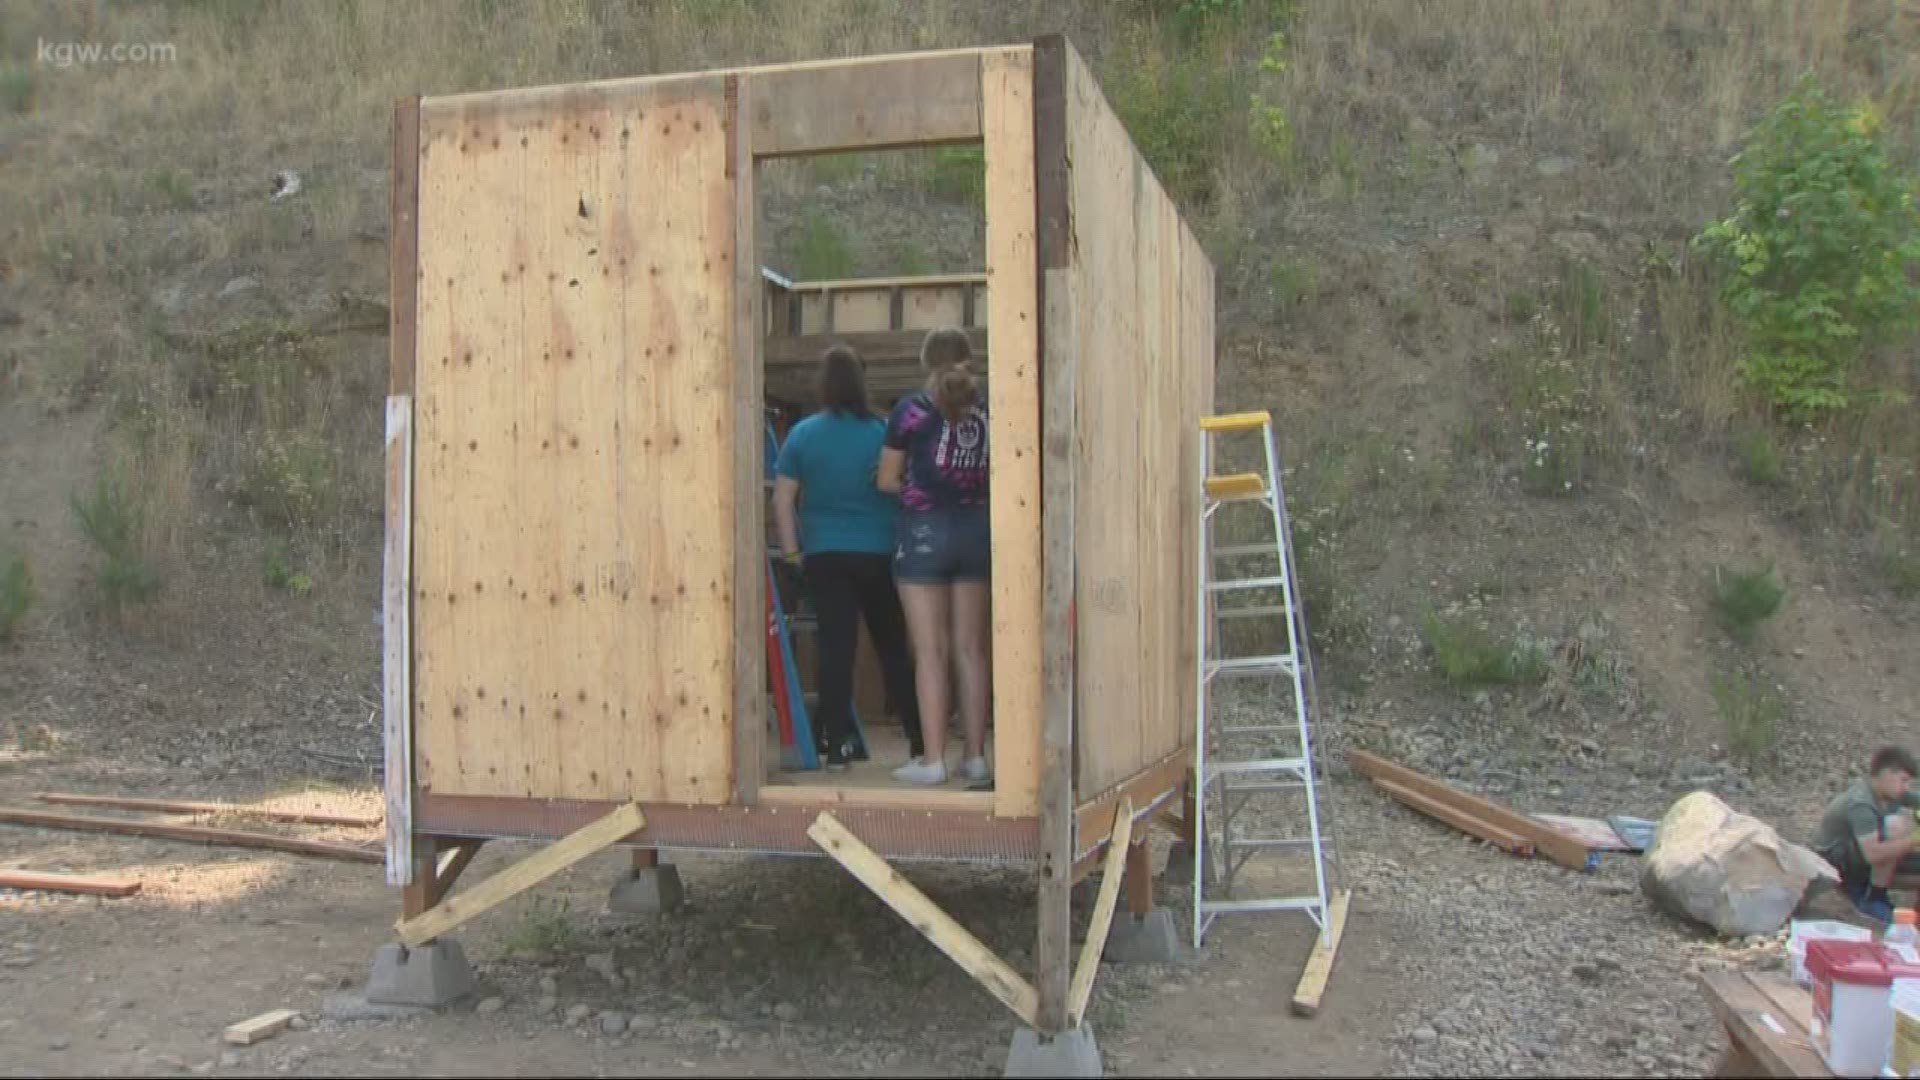 The Agape Church of Christ in downtown Portland is leading the effort to build a tiny house village near I-205 and Powell Boulevard.